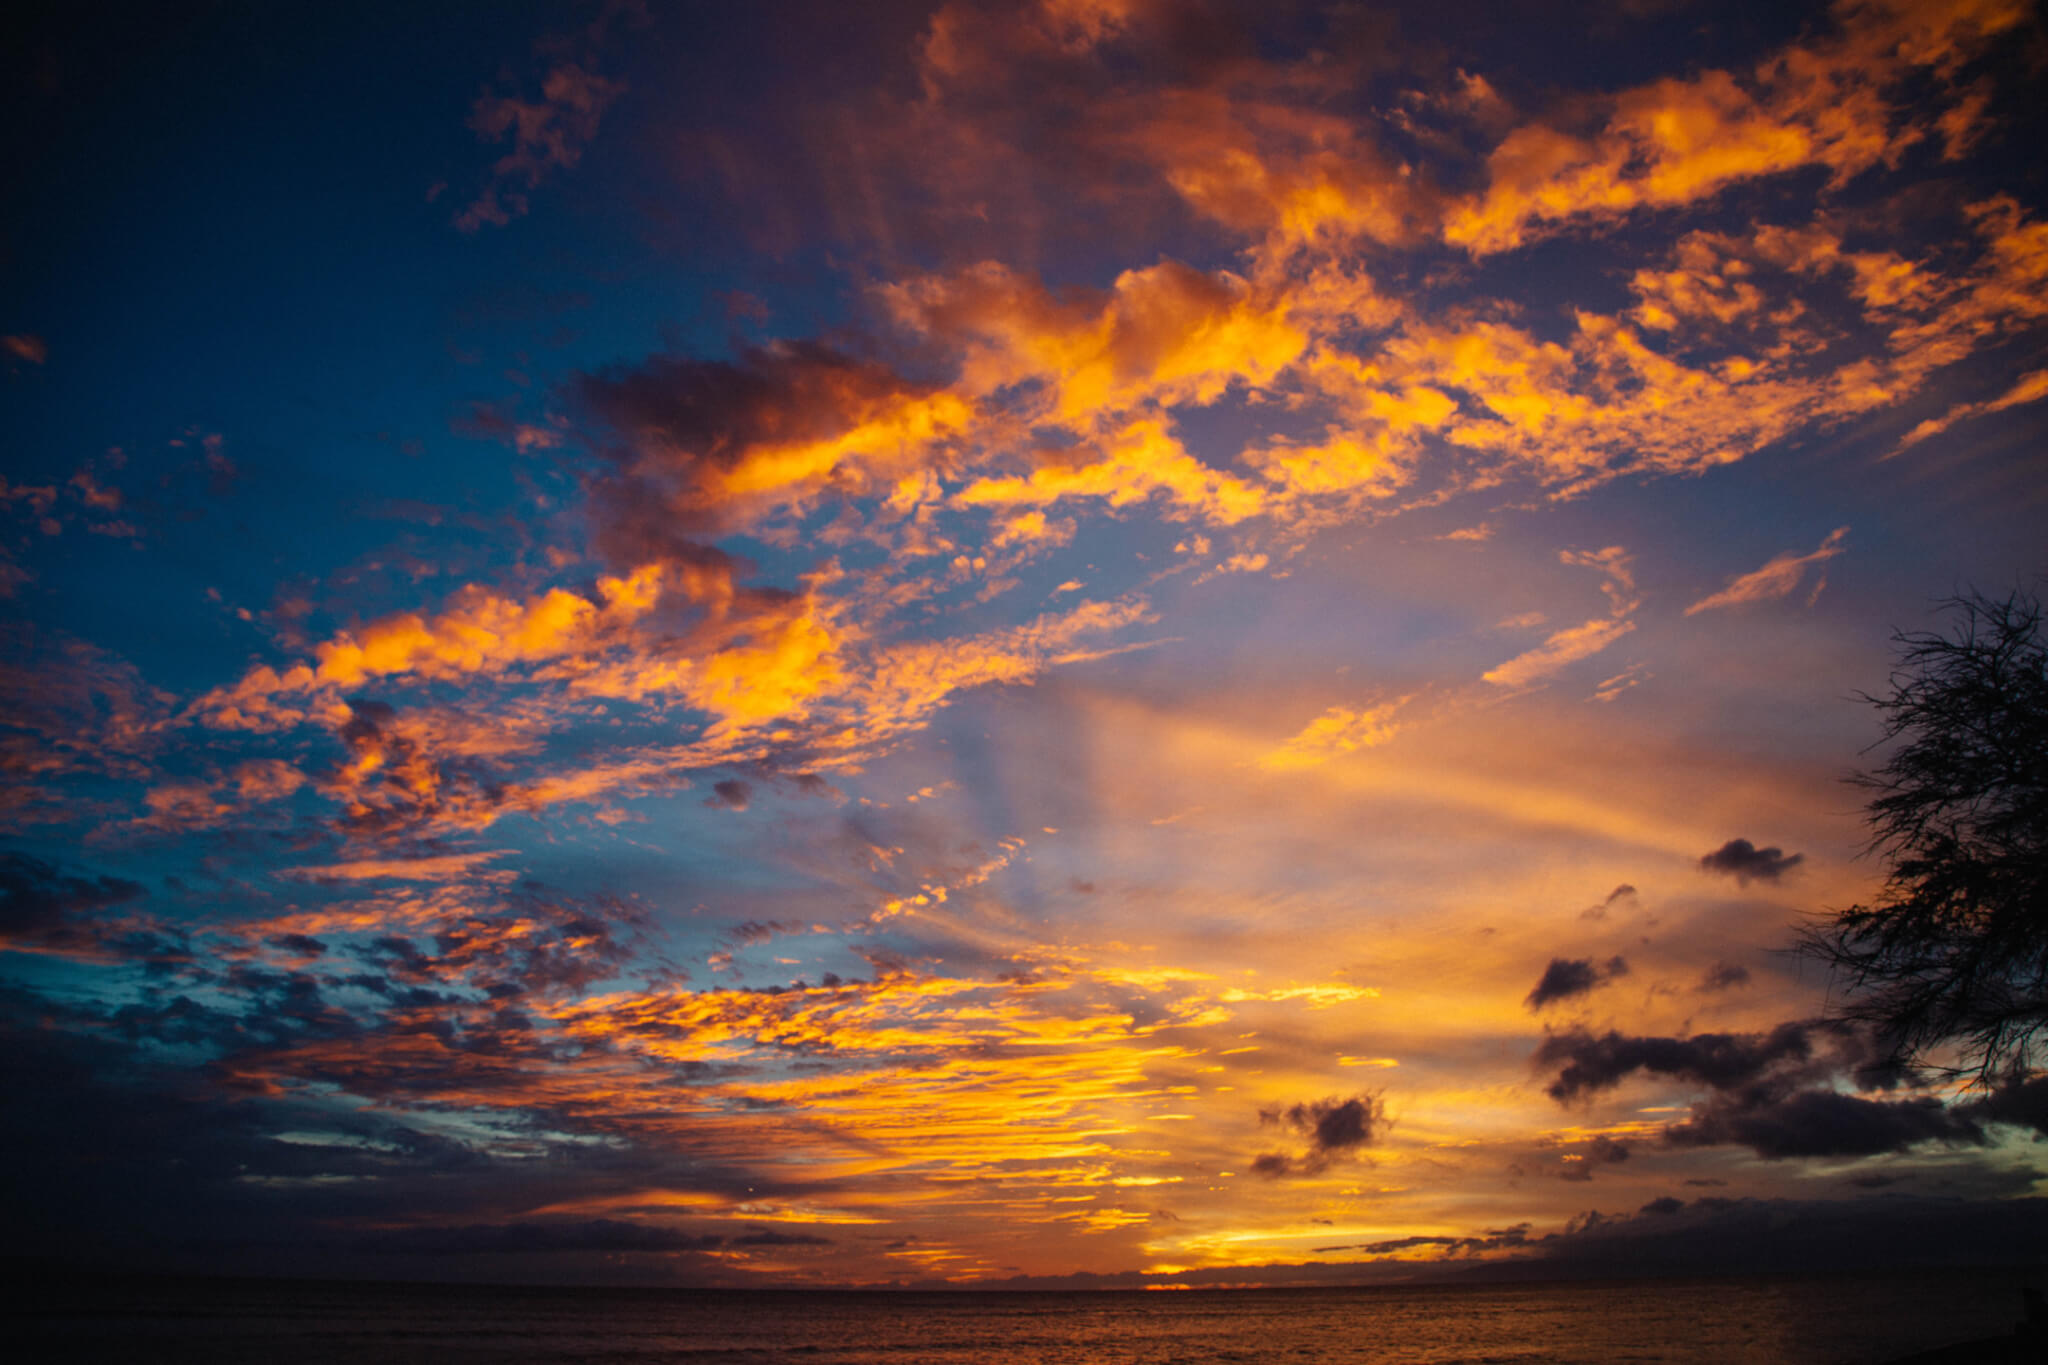 Most incredible sunset ever from Maui, Hawaii